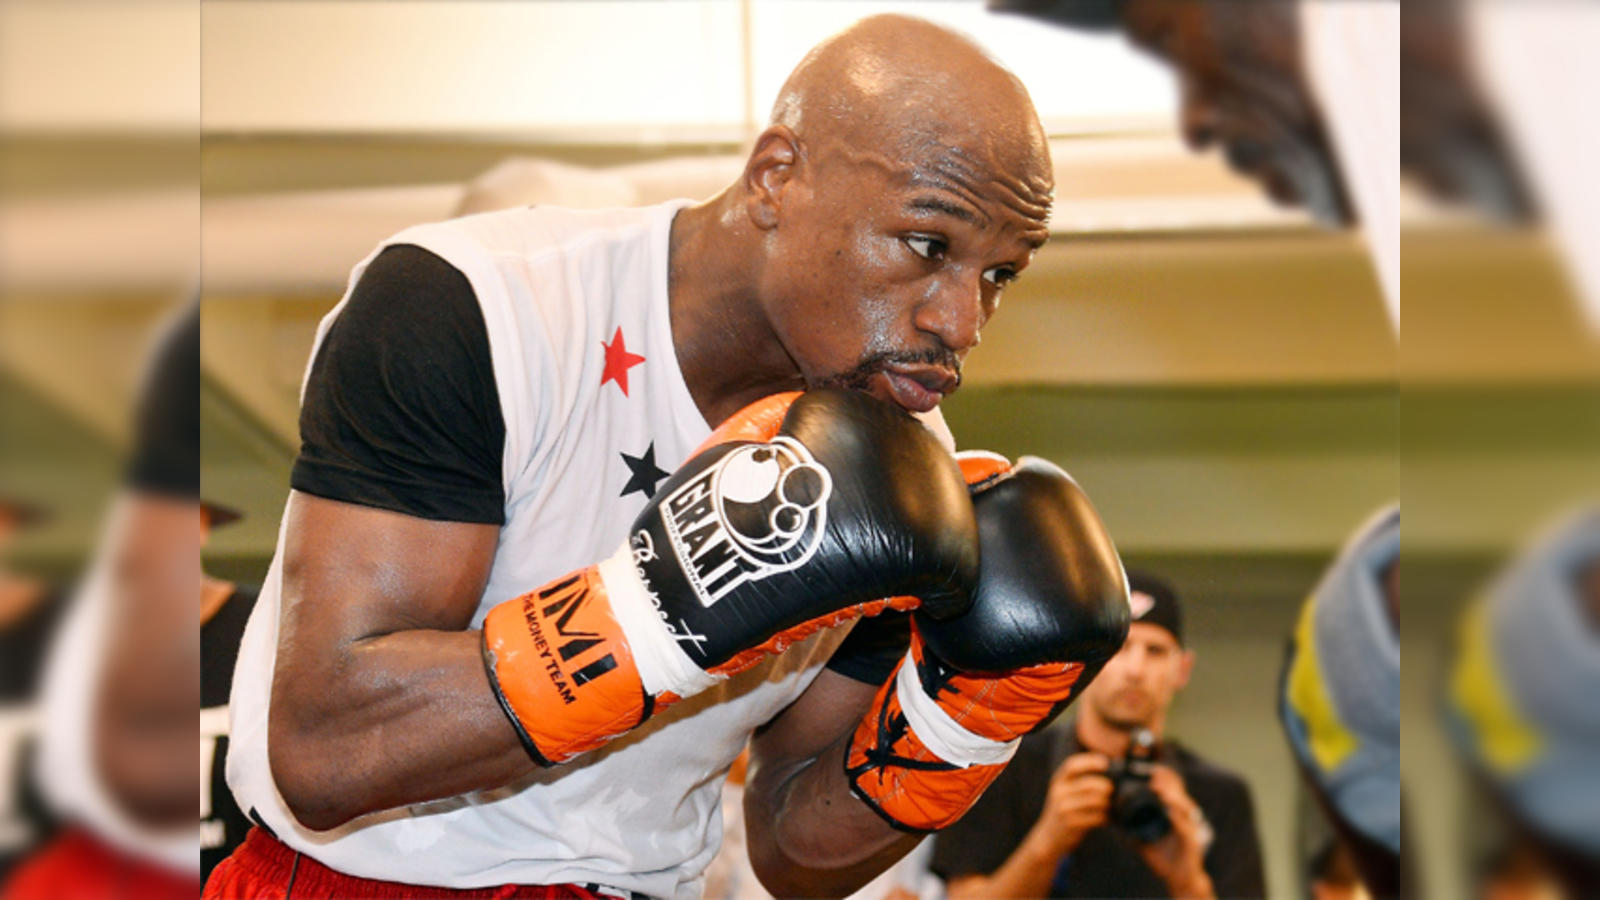 Floyd Mayweather Jr. launches The Money Team Racing